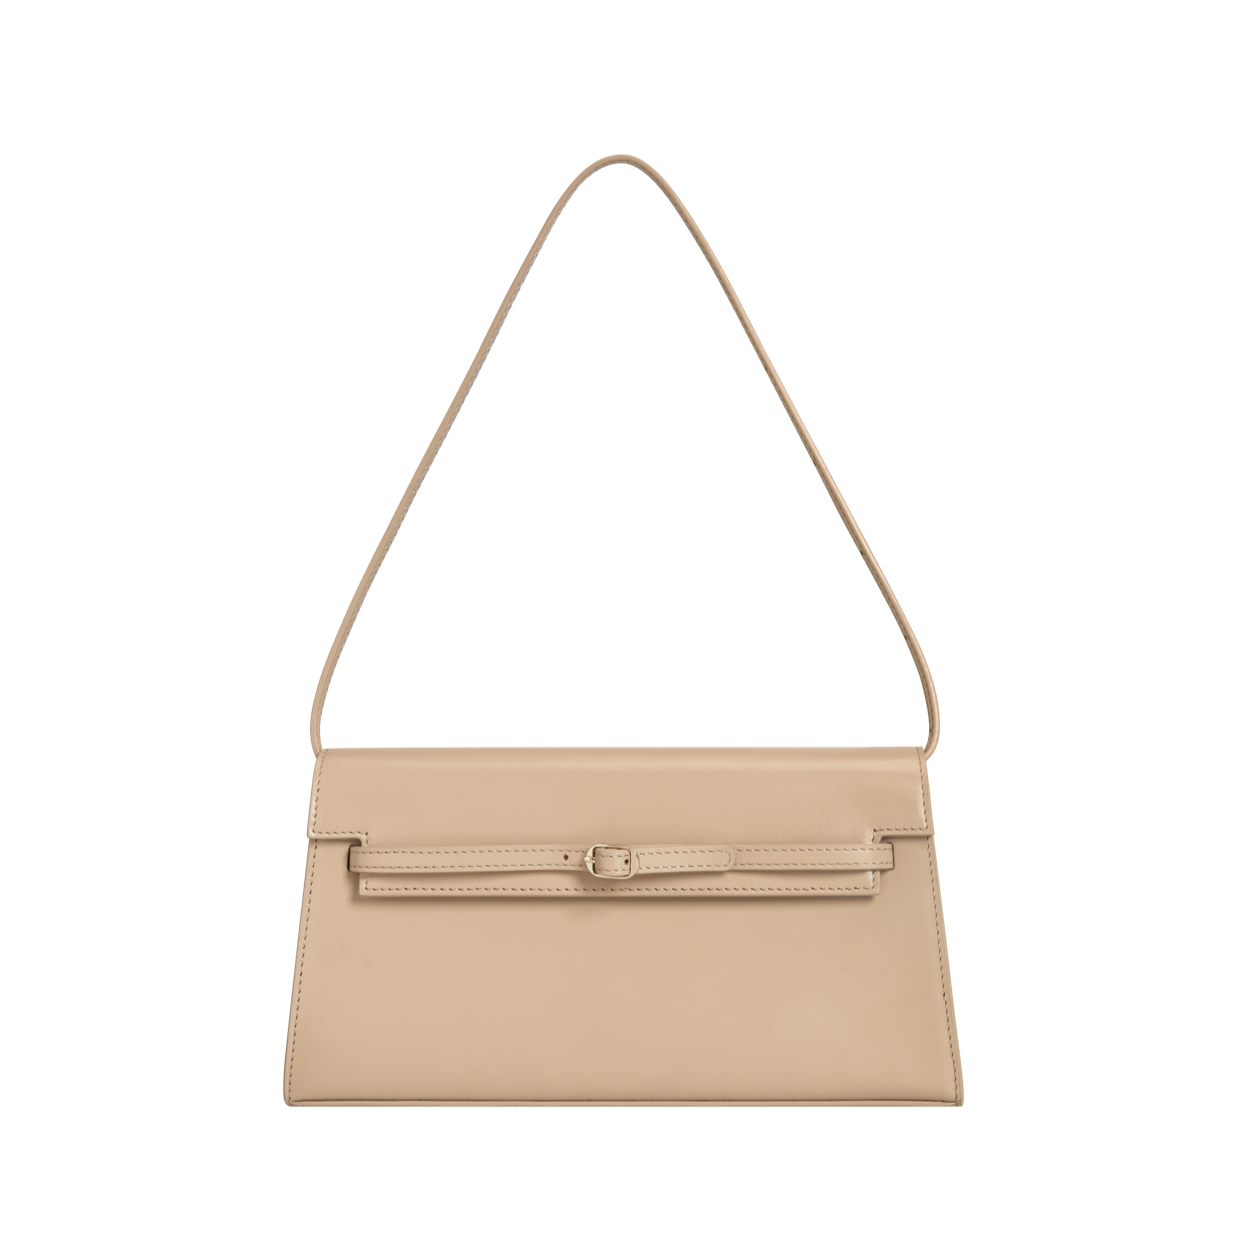 Sand Beige Shoulder Bag (Pre-Order Only. Will Ship May 27th)